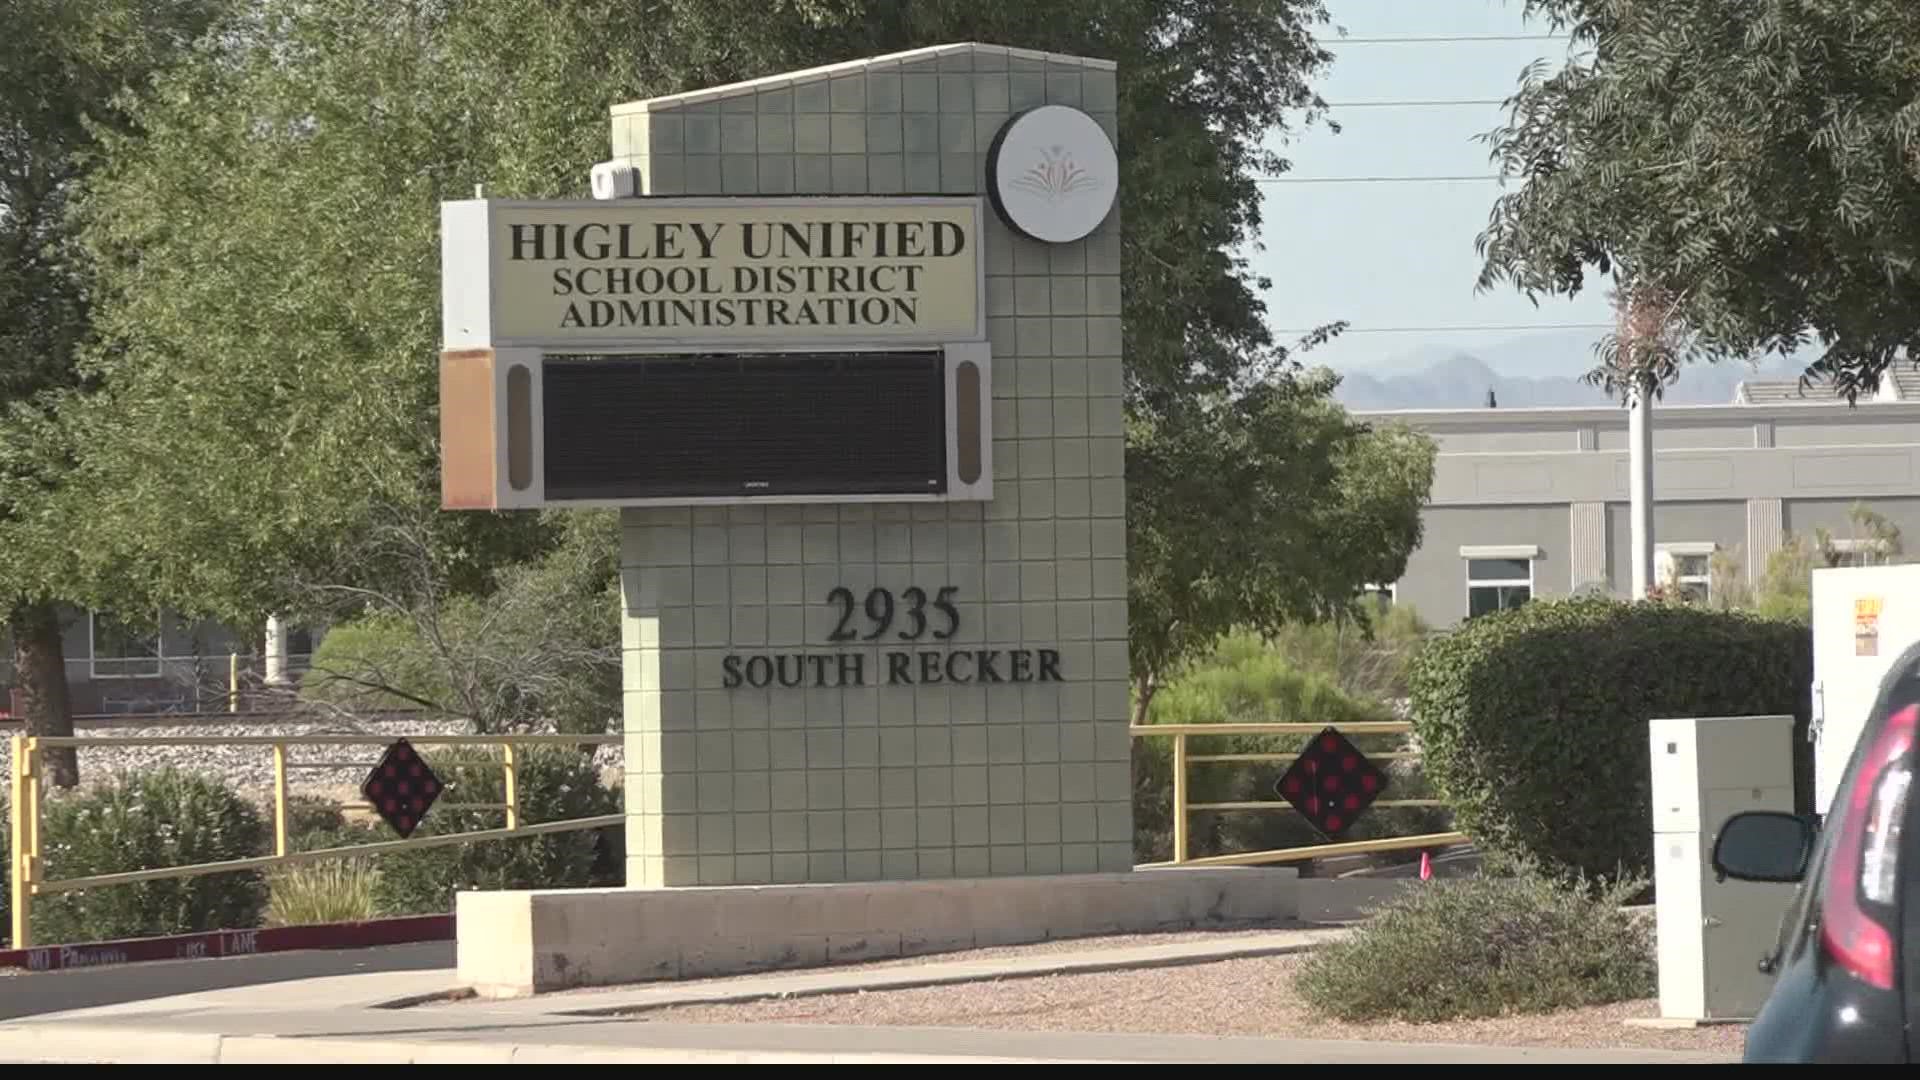 Gilbert police arrested a former Higley High teacher on several charges related to an inappropriate relationship with a 14-year-old student at the school.